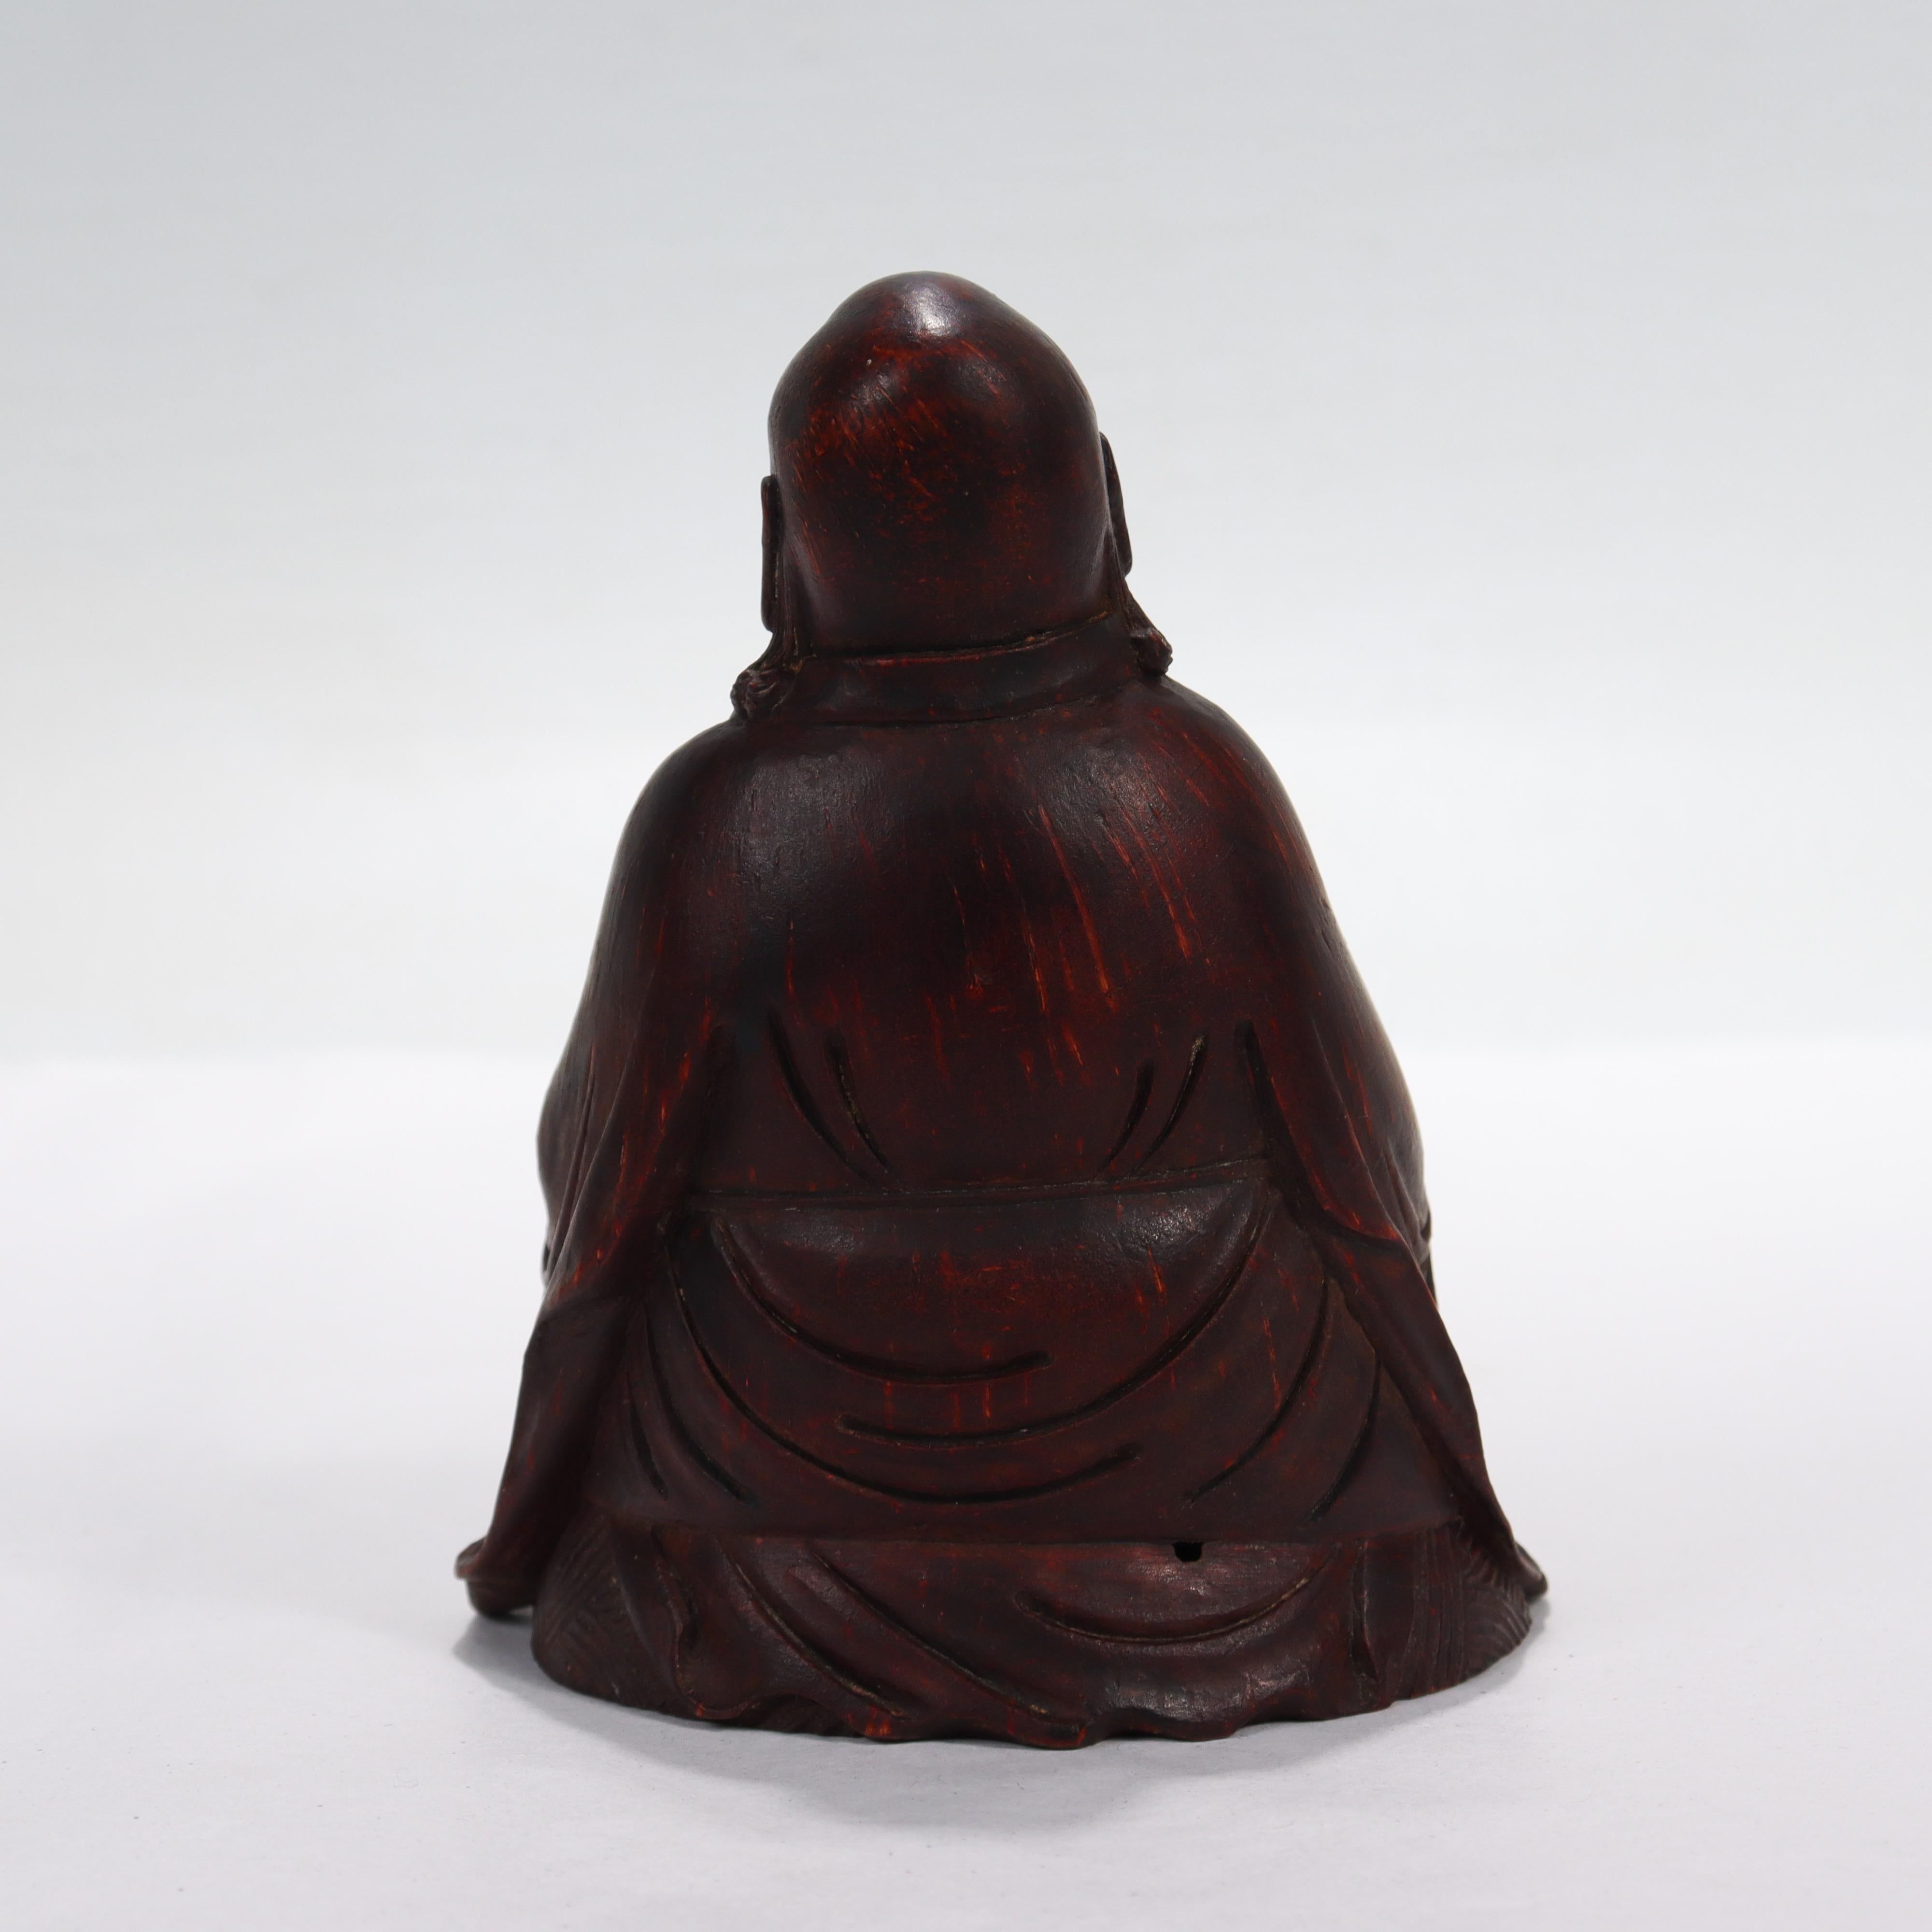 20th Century Old or Antique Japanese Wooden Figurine of a Buddhist Monk For Sale